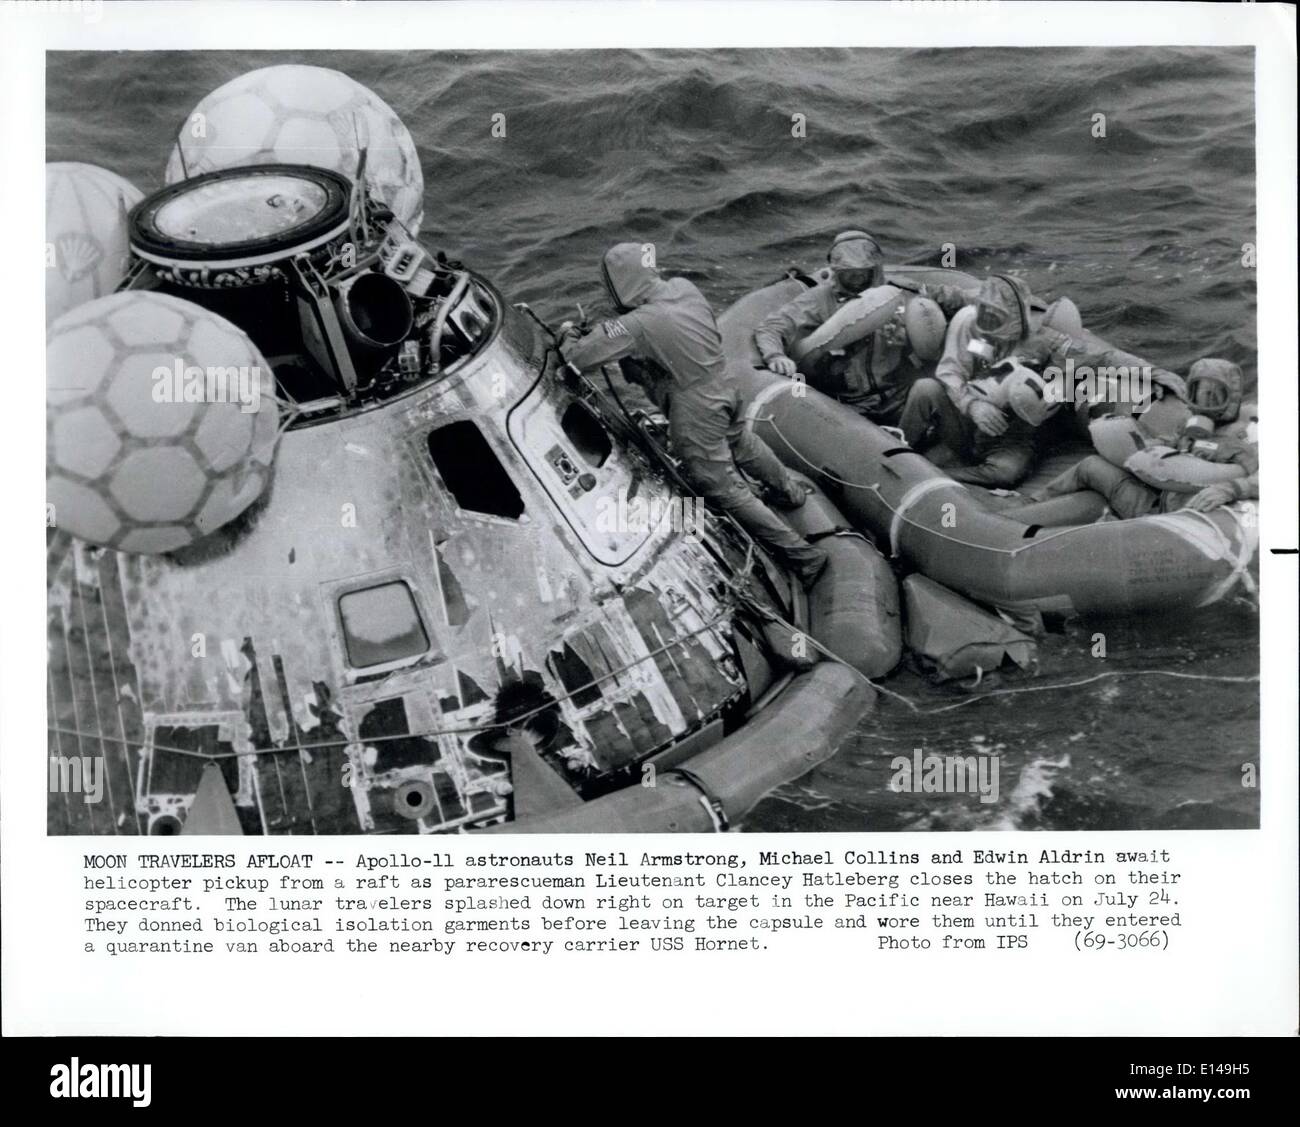 Apr. 17, 2012 - Moon Travellers Afloat -- Apollo-11 astronauts Neil Armstrong, Michael Collins and Edwin Aldrin await helicopter pick-up from a raft as pararescueman Lieutenant Clancey Hatleberg closes the hatch on their spacecraft. The lunar travellers splashed down right on target in the Pacific near Hawaii on July 24. They donned biological isolation garments before leaving the capsule and wore them until they entered a quarantine van aboard the nearby recovery carrier USS Hornet. Stock Photo